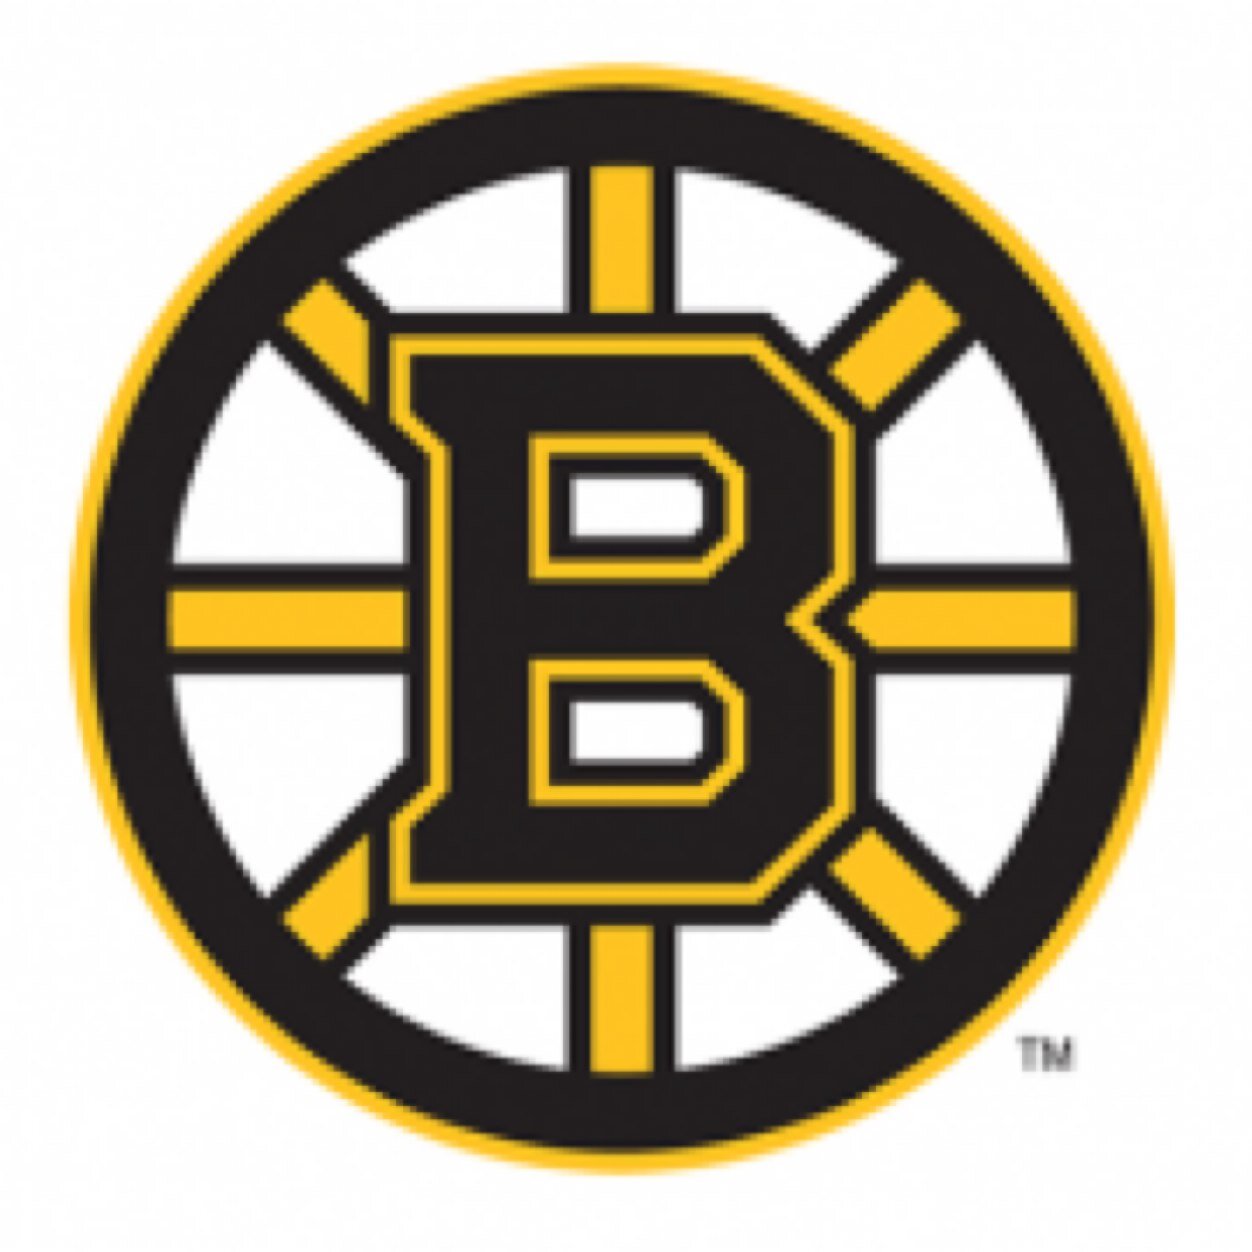 To all my Boston Sport Fans who love the Patriots RedSox Bruins Celtics follow me lets keep #BostonStrong together